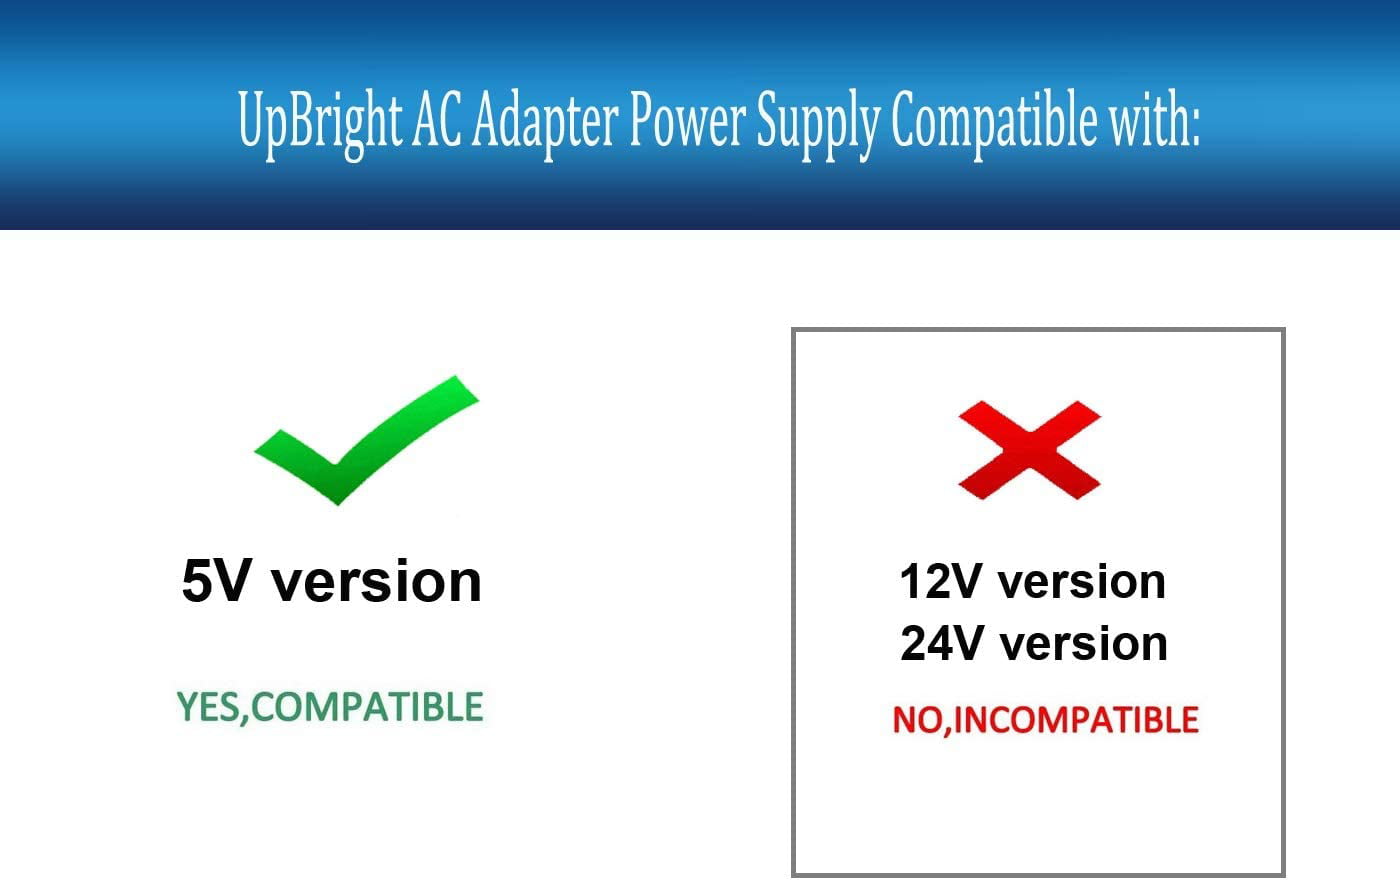 464479 Compatible Zigbee S005BMM0500100 AC/DC Wireless 3rd Philips 2.1 2.0 Anatel 2nd Gen CE0979 3241312018A UpBright with Generation Hue Adapter IP 1st Power Supply WiFi 5V 458471 LED Bridge Lighting